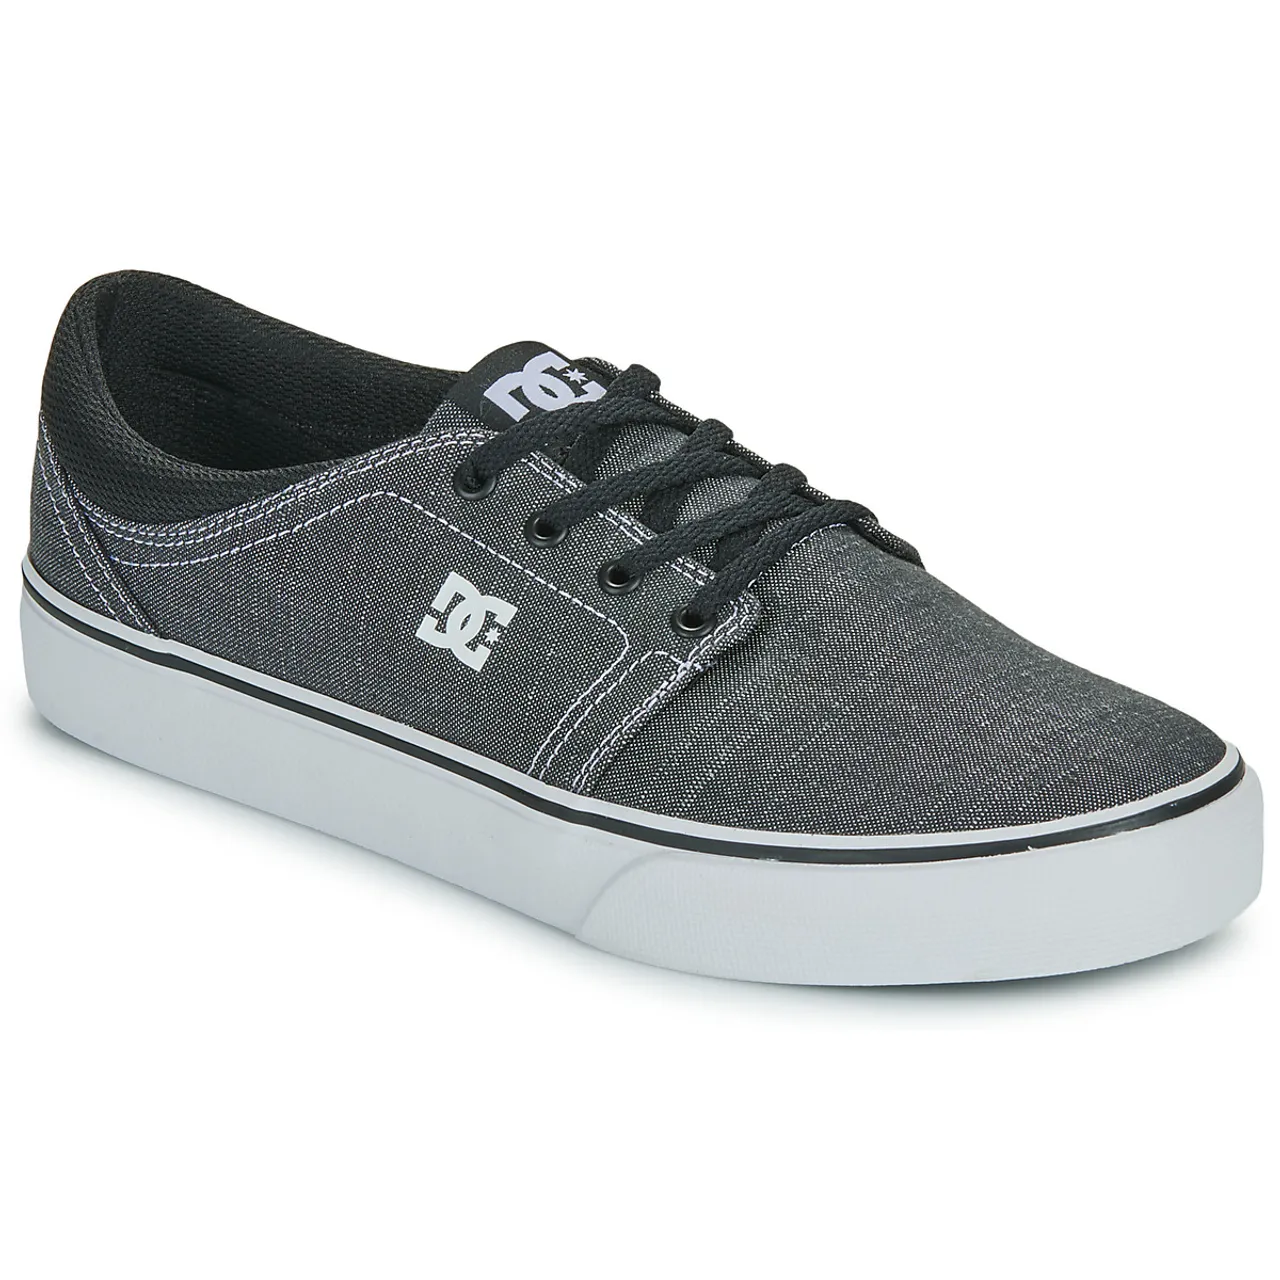 DC Shoes  TRASE TX SE  men's Shoes (Trainers) in Black